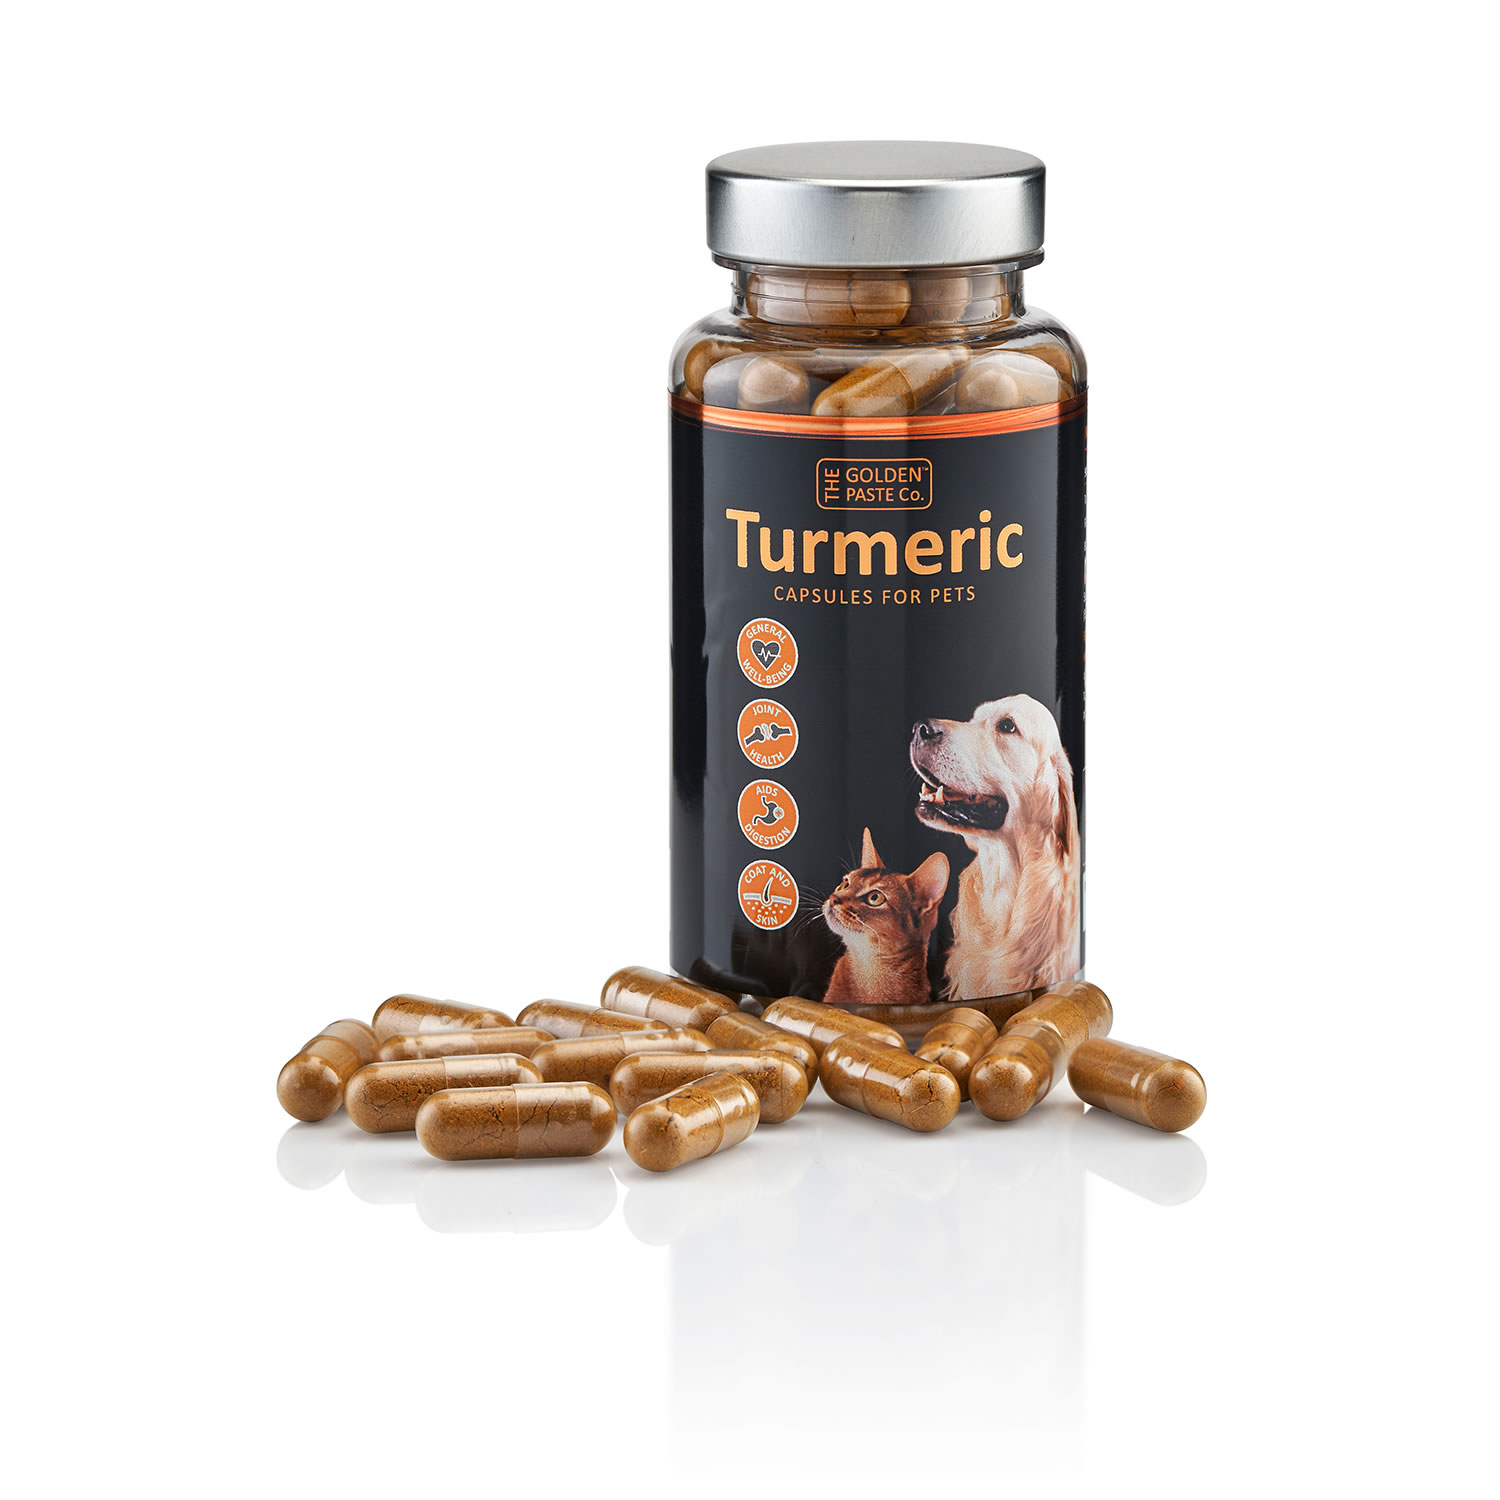 GOLDEN PASTE COMPANY TURMERIC CAPSULES FOR PETS 90 CAPSULES